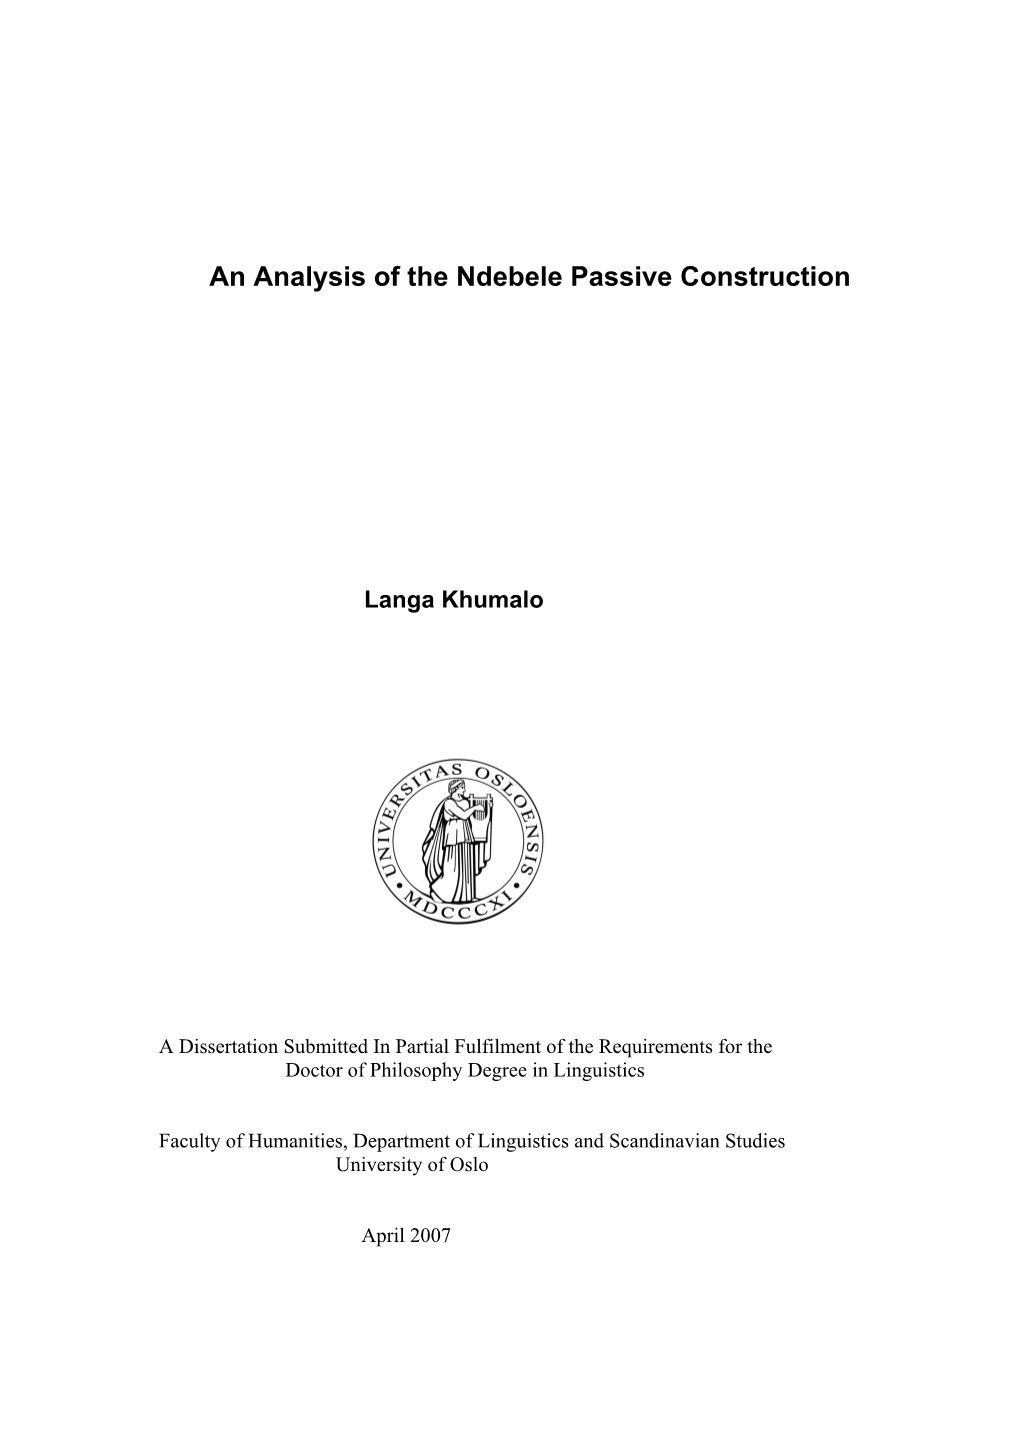 An Analysis of the Ndebele Passive Construction